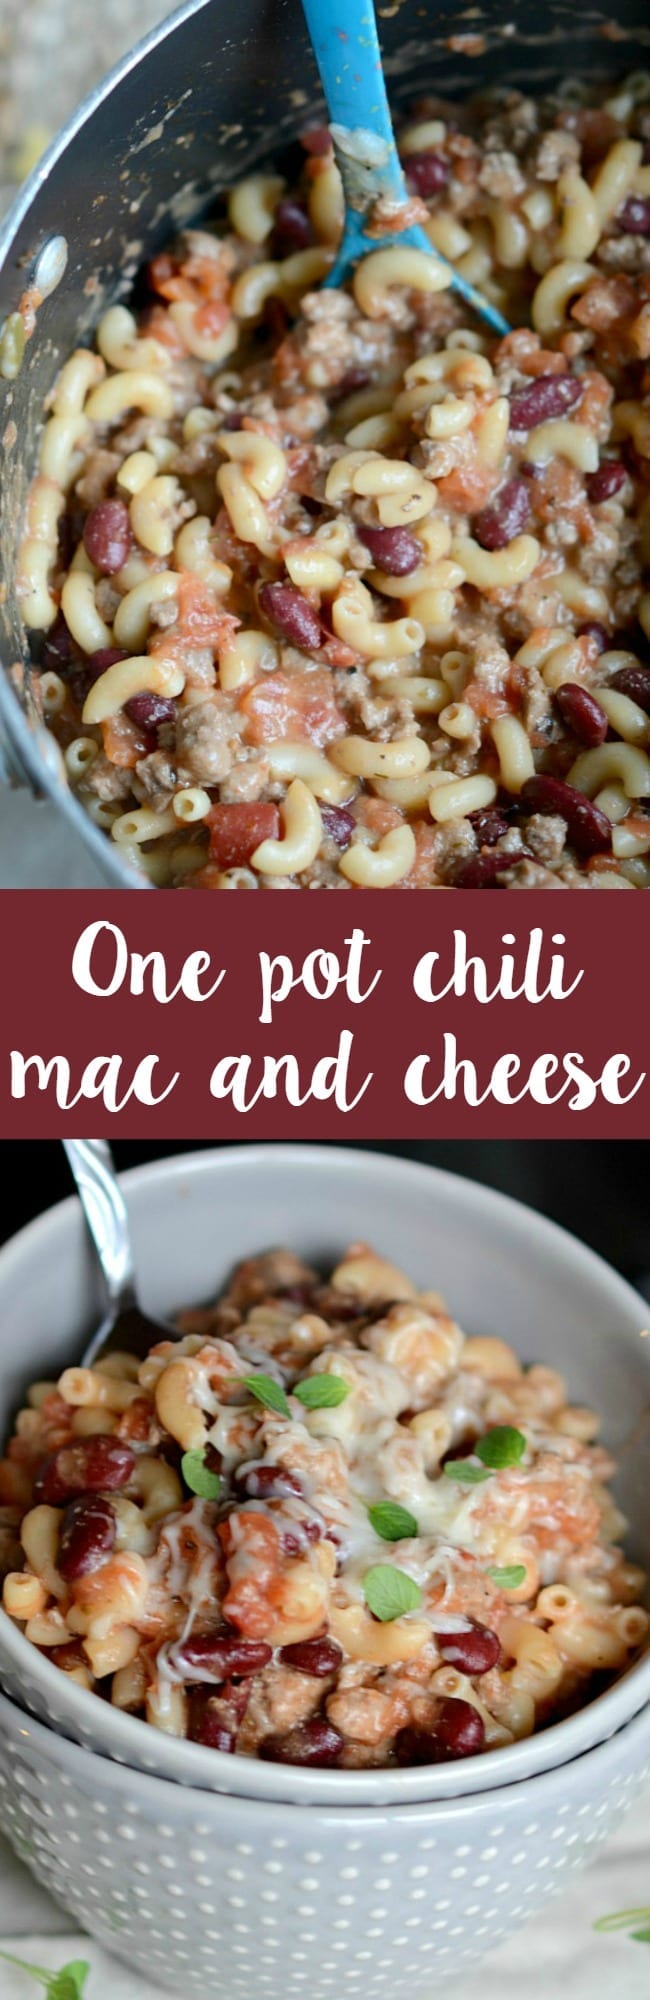 ONE pot chili and mac and cheese! So easy and ready in under 30 minutes